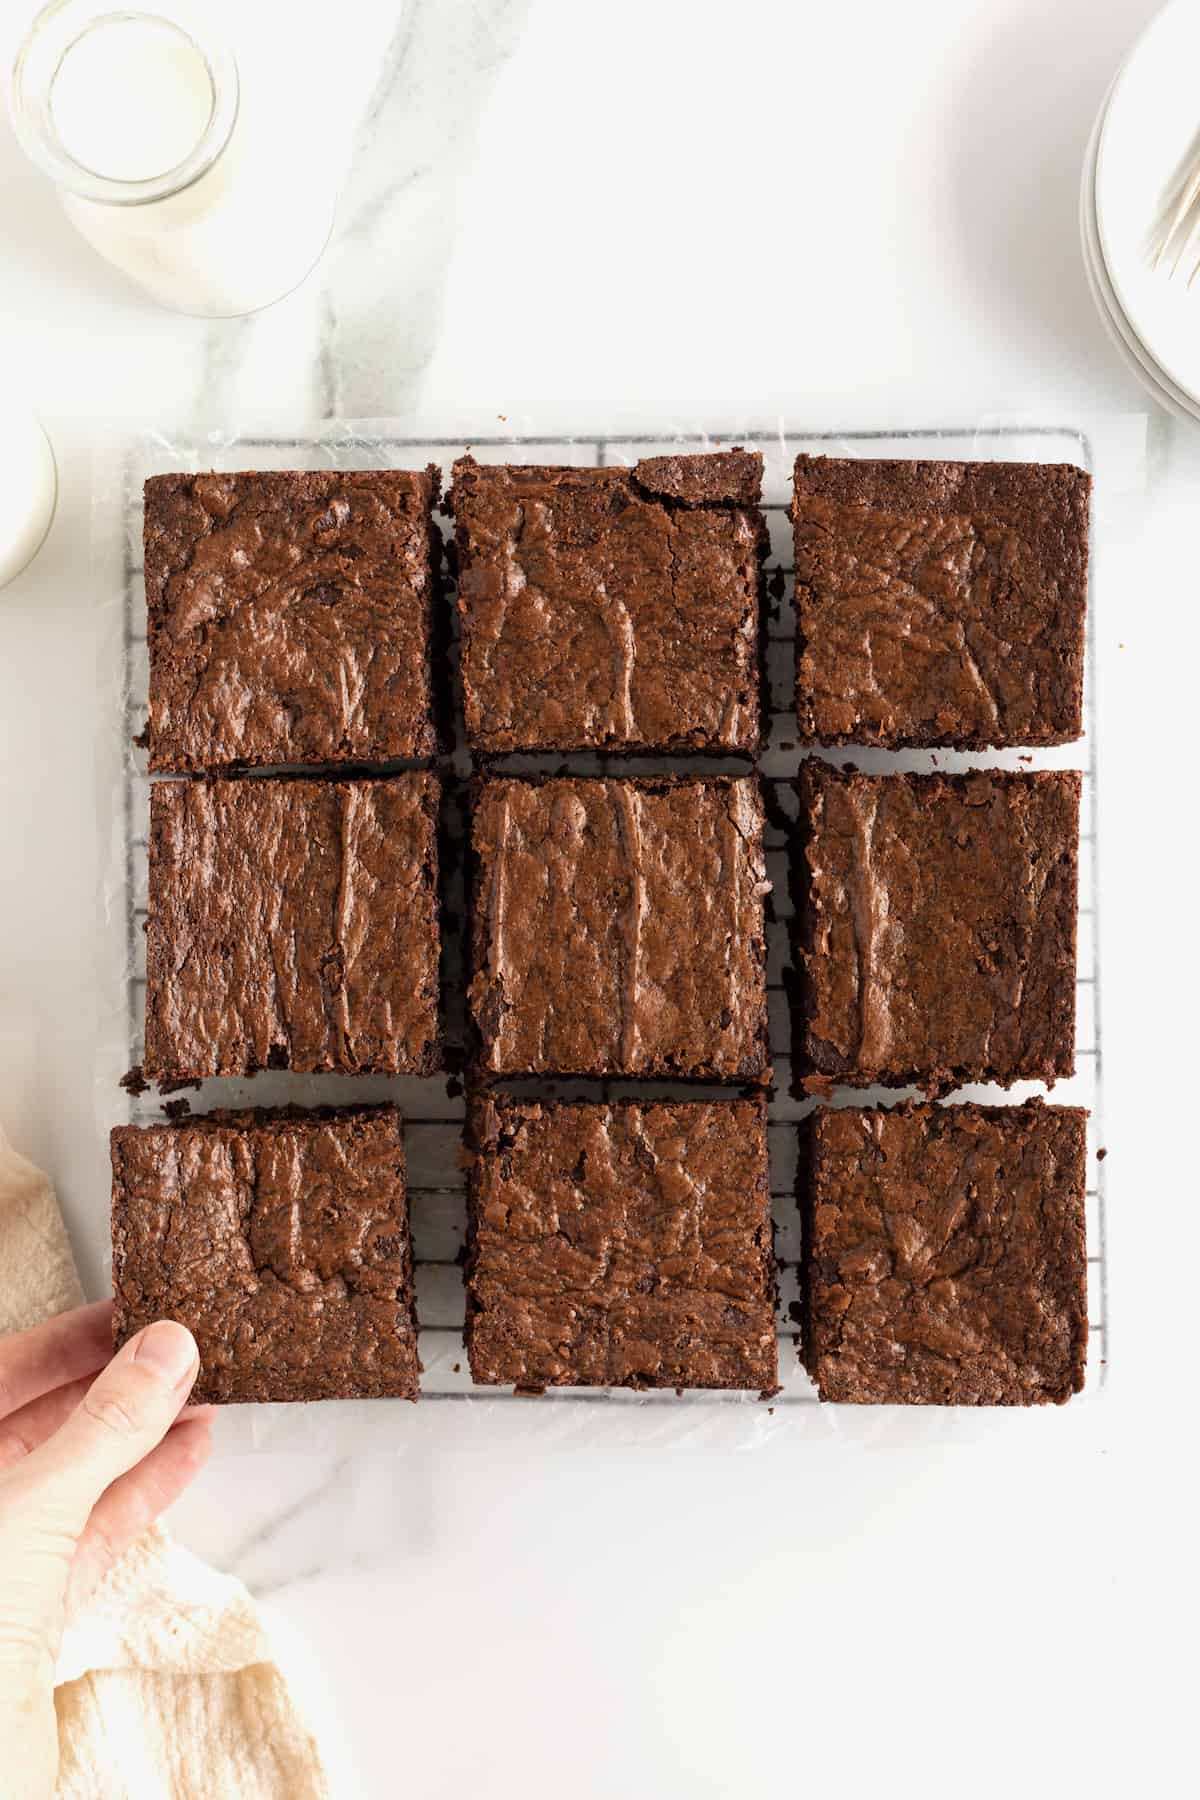 Nutella brownies with a crackly top cut into nine squares.